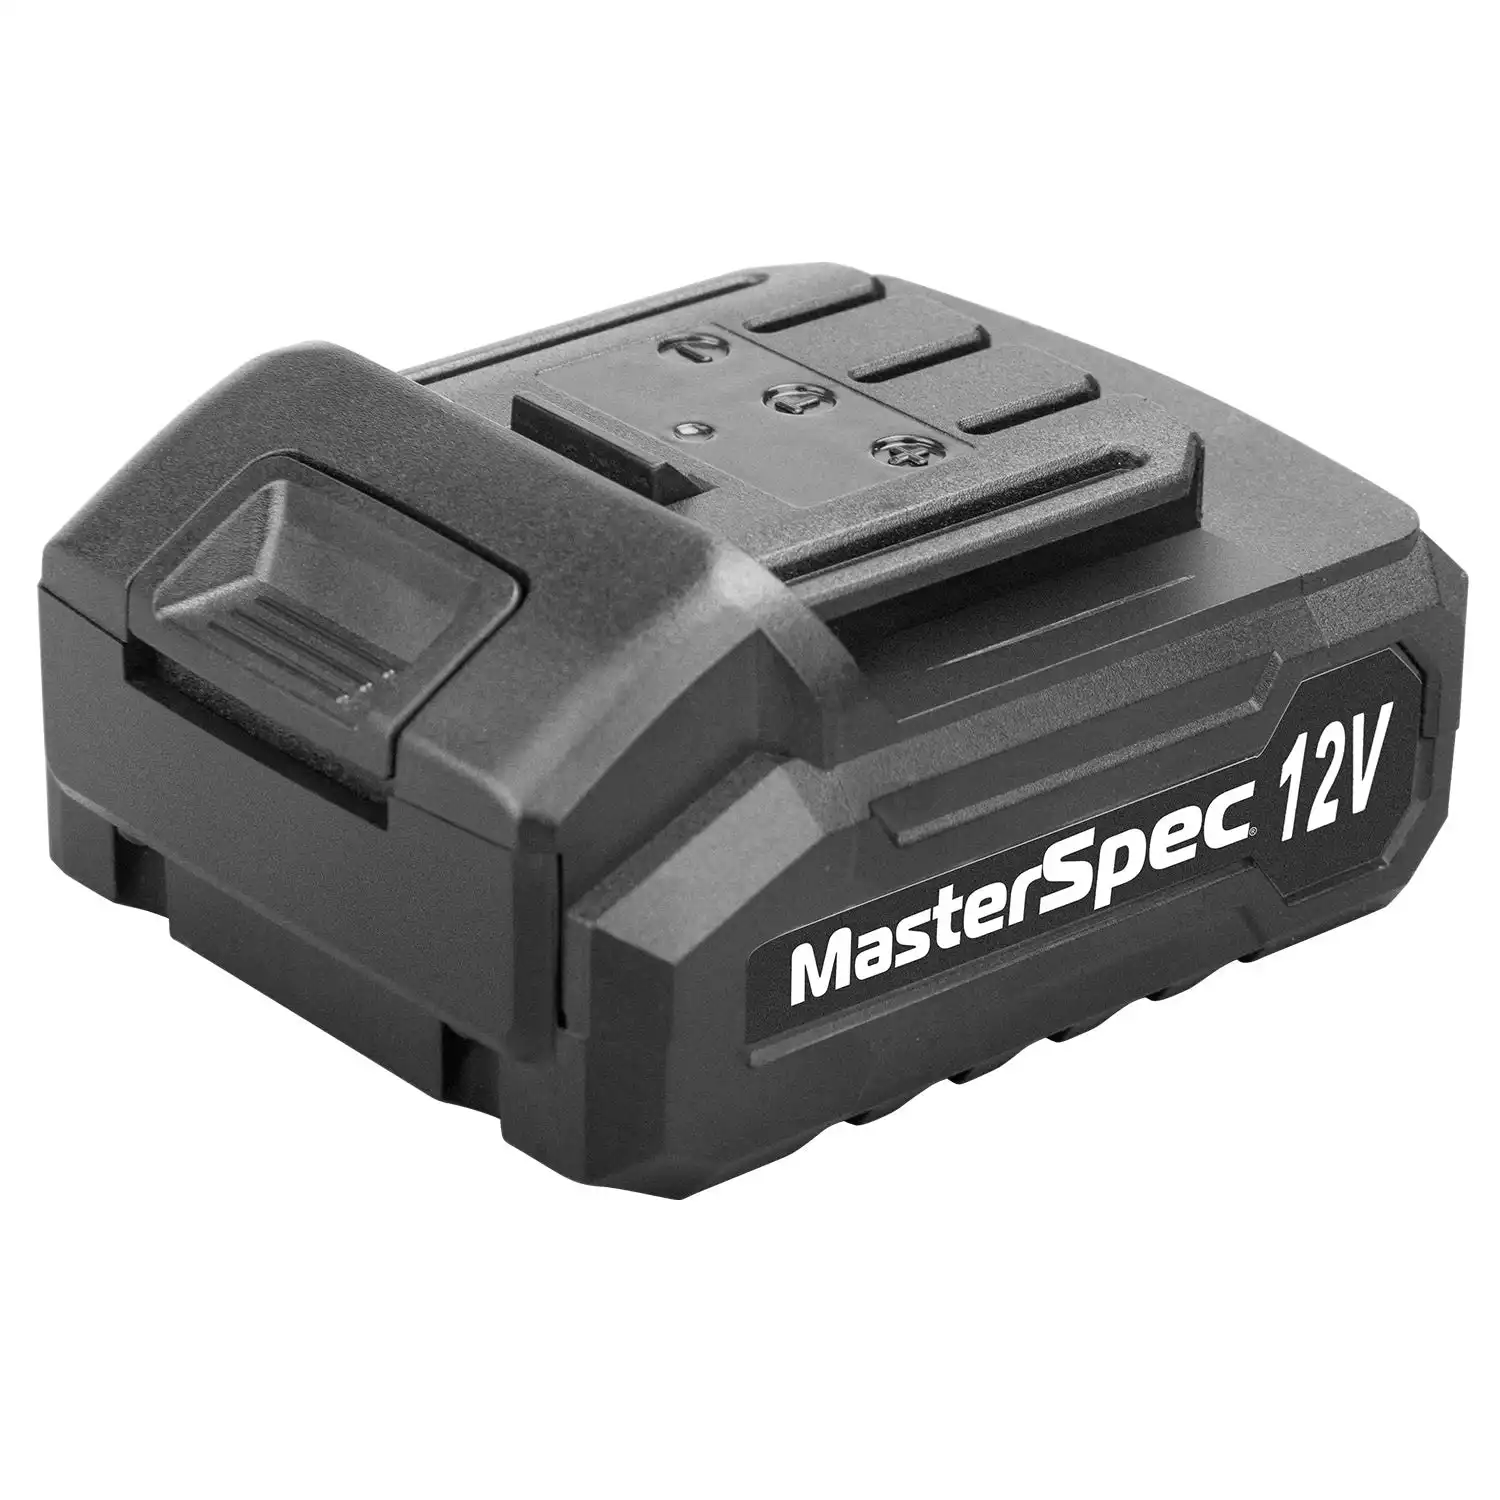 MasterSpec 12V 1.3Ah Battery Replacement for MS005